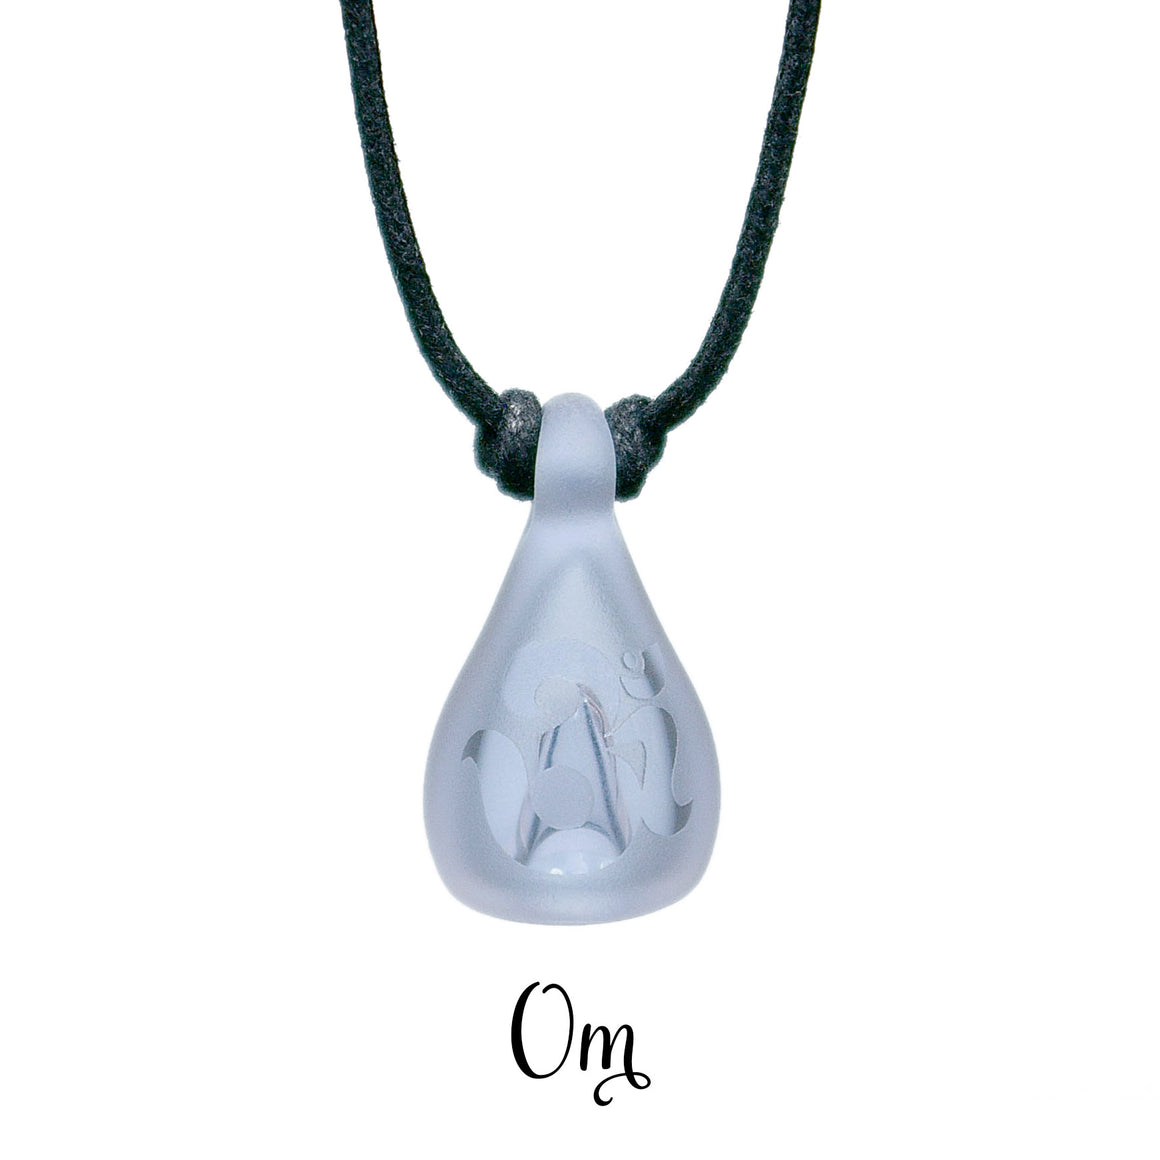 Aromatherapy Jewelry, Colored Frosted with Design - Om